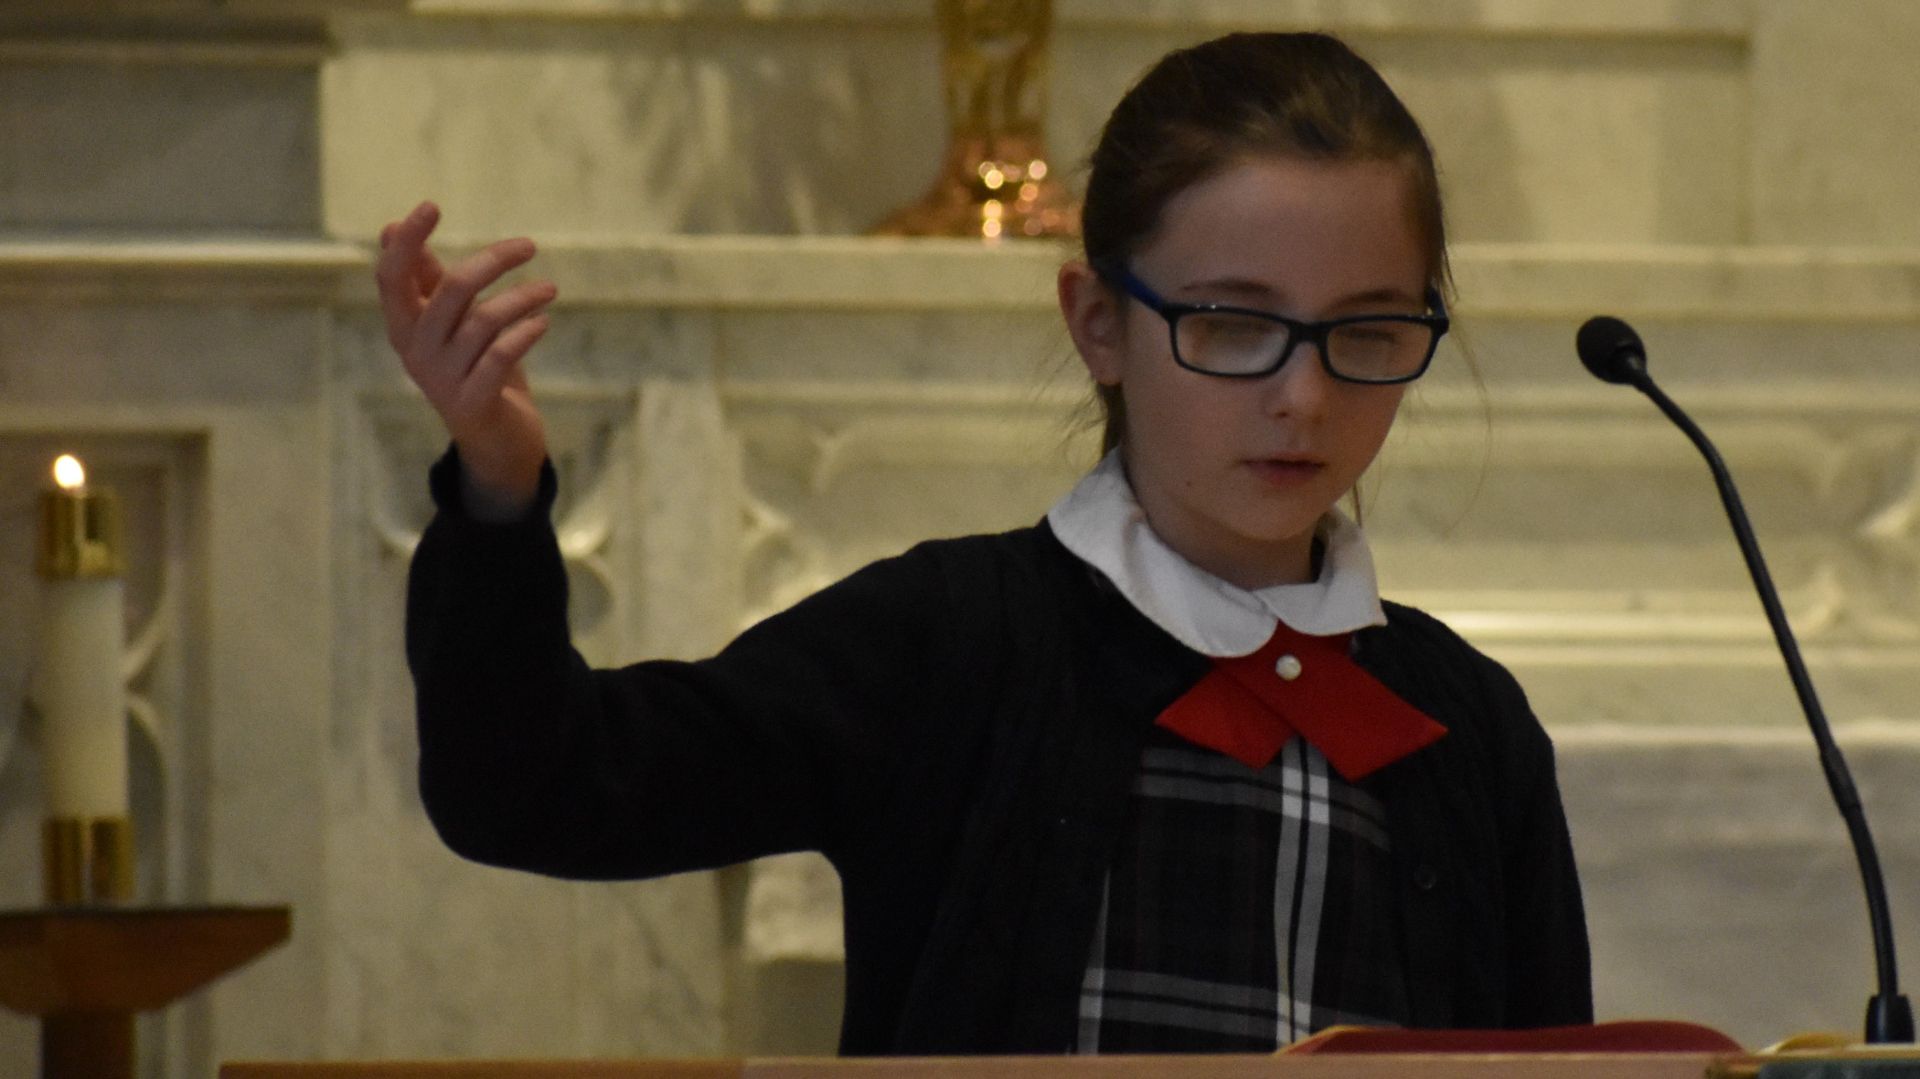 A young girl wearing glasses is giving a speech in front of a microphone